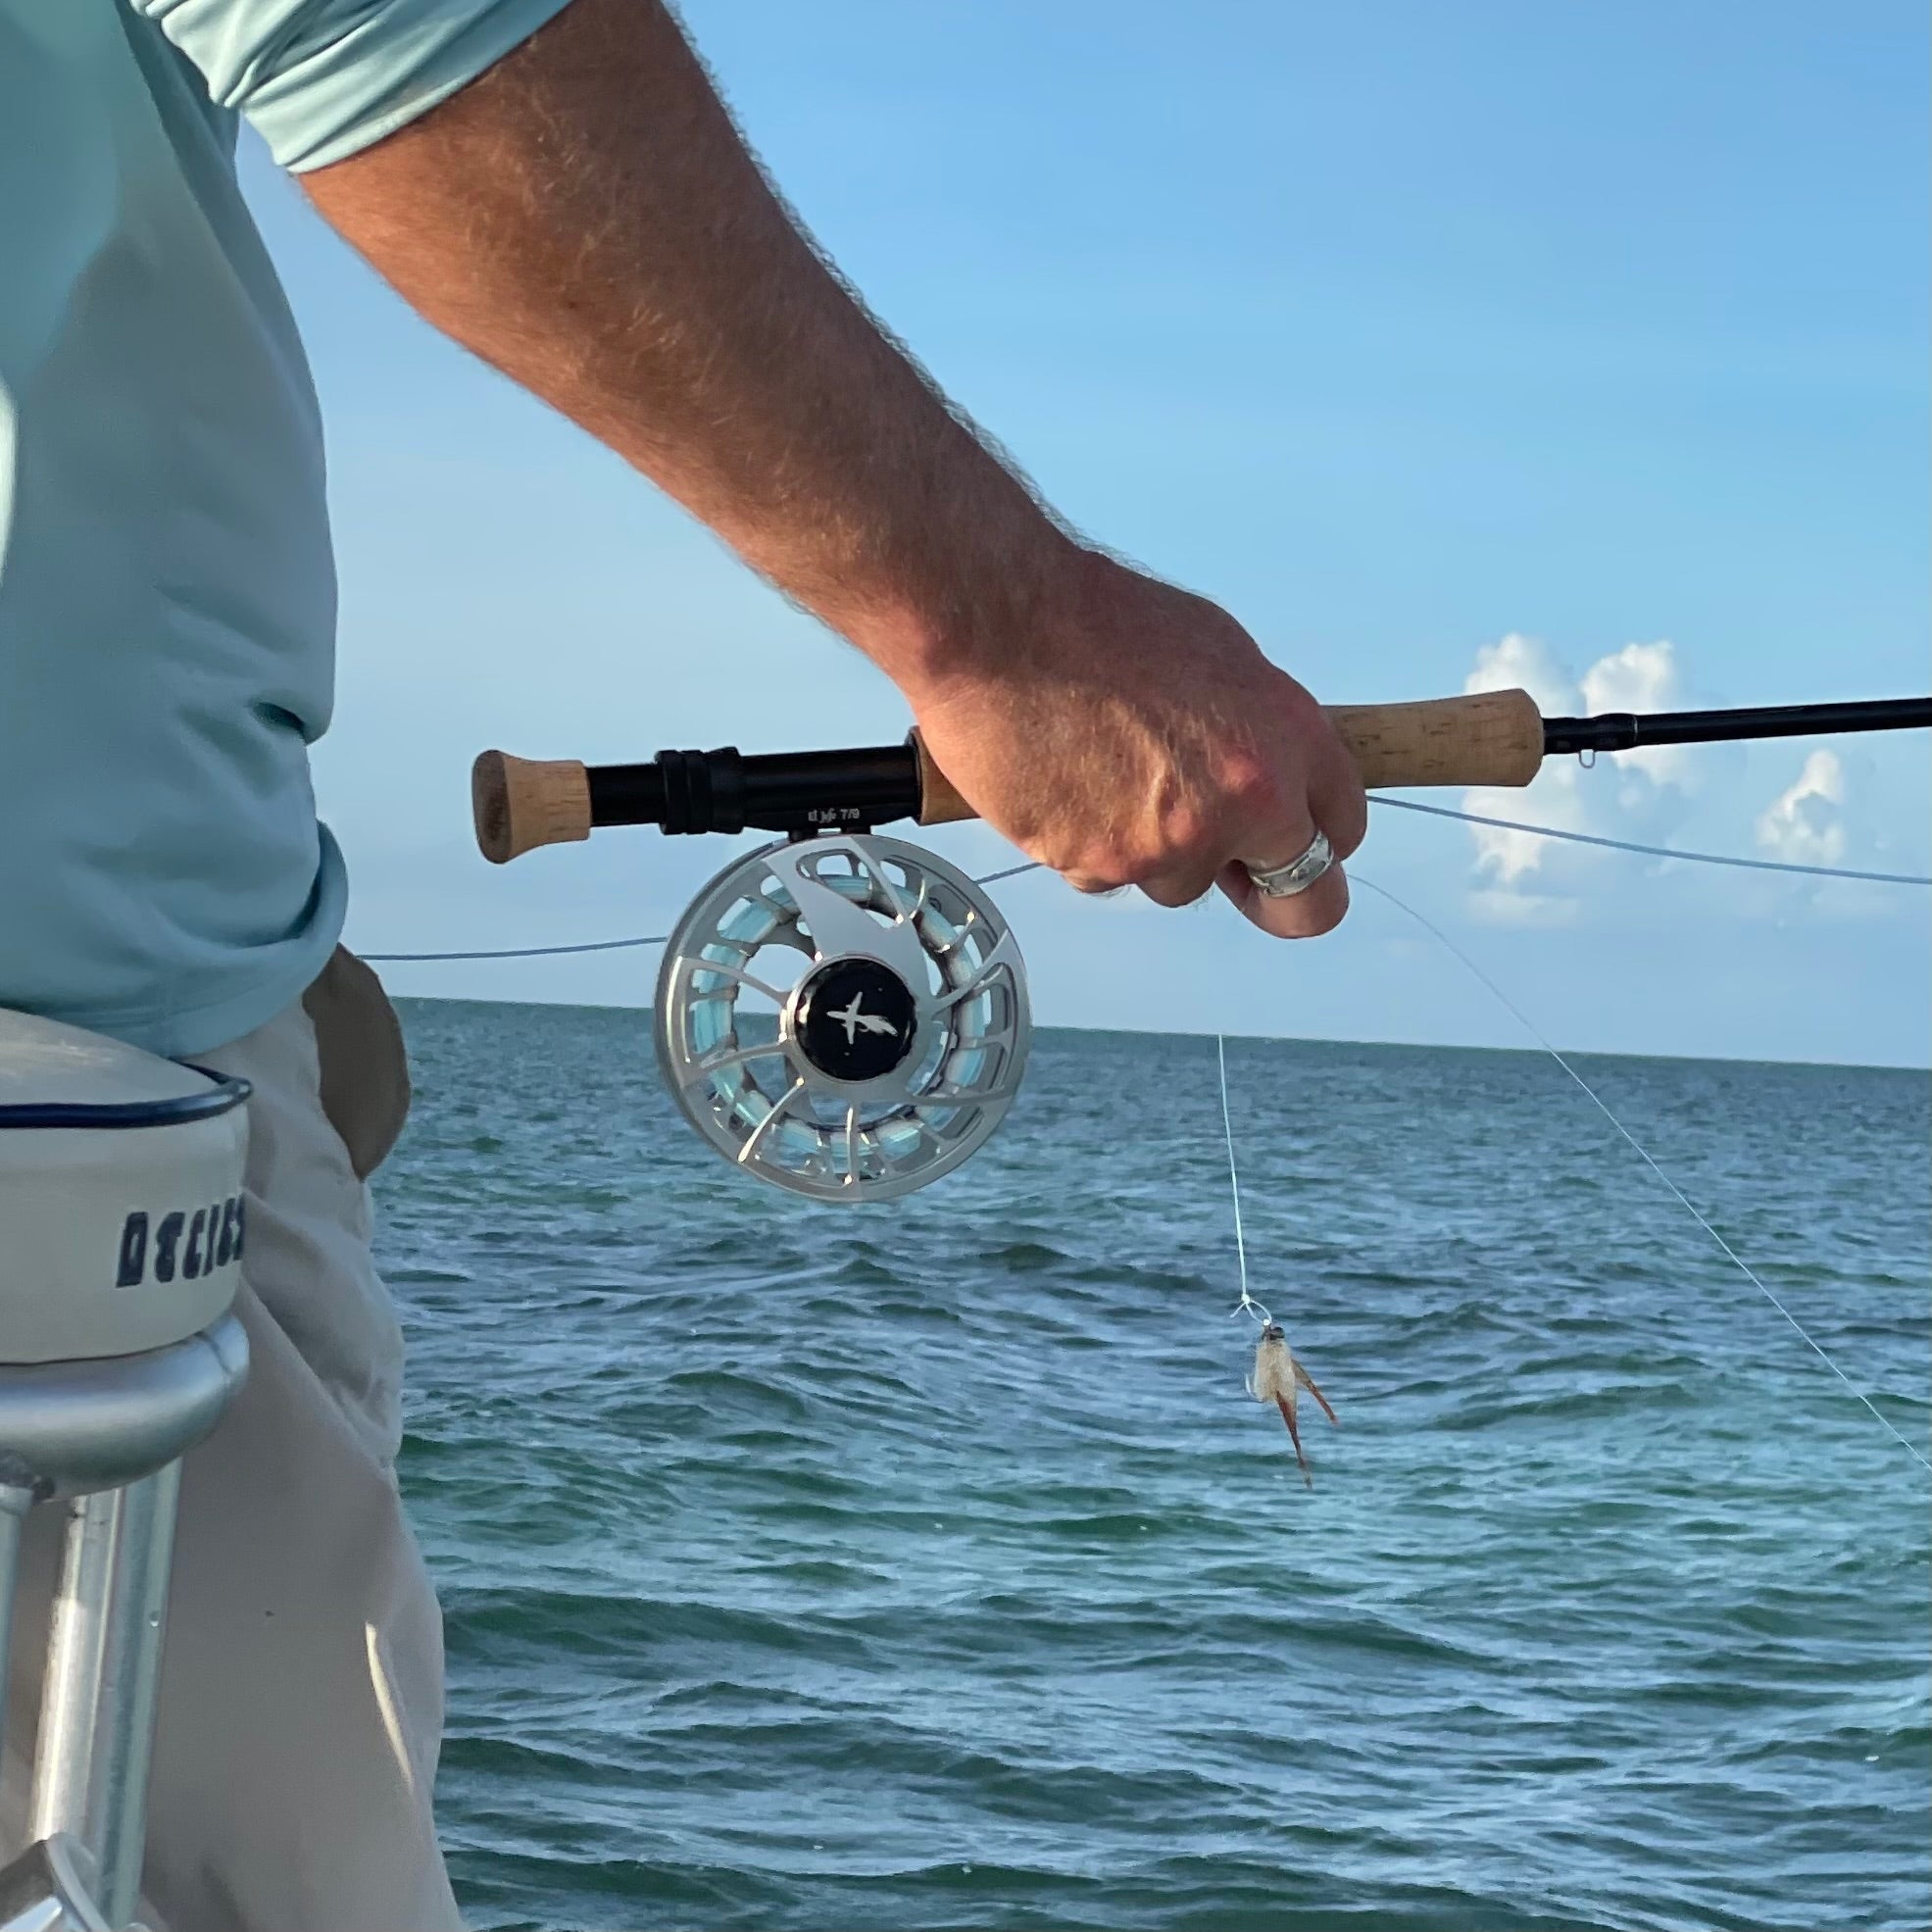 El Jefe Saltwater Fly Fishing Combo Package |906-7 | 9' Six Section 7 Weight Fly Rod And Reel Outfit